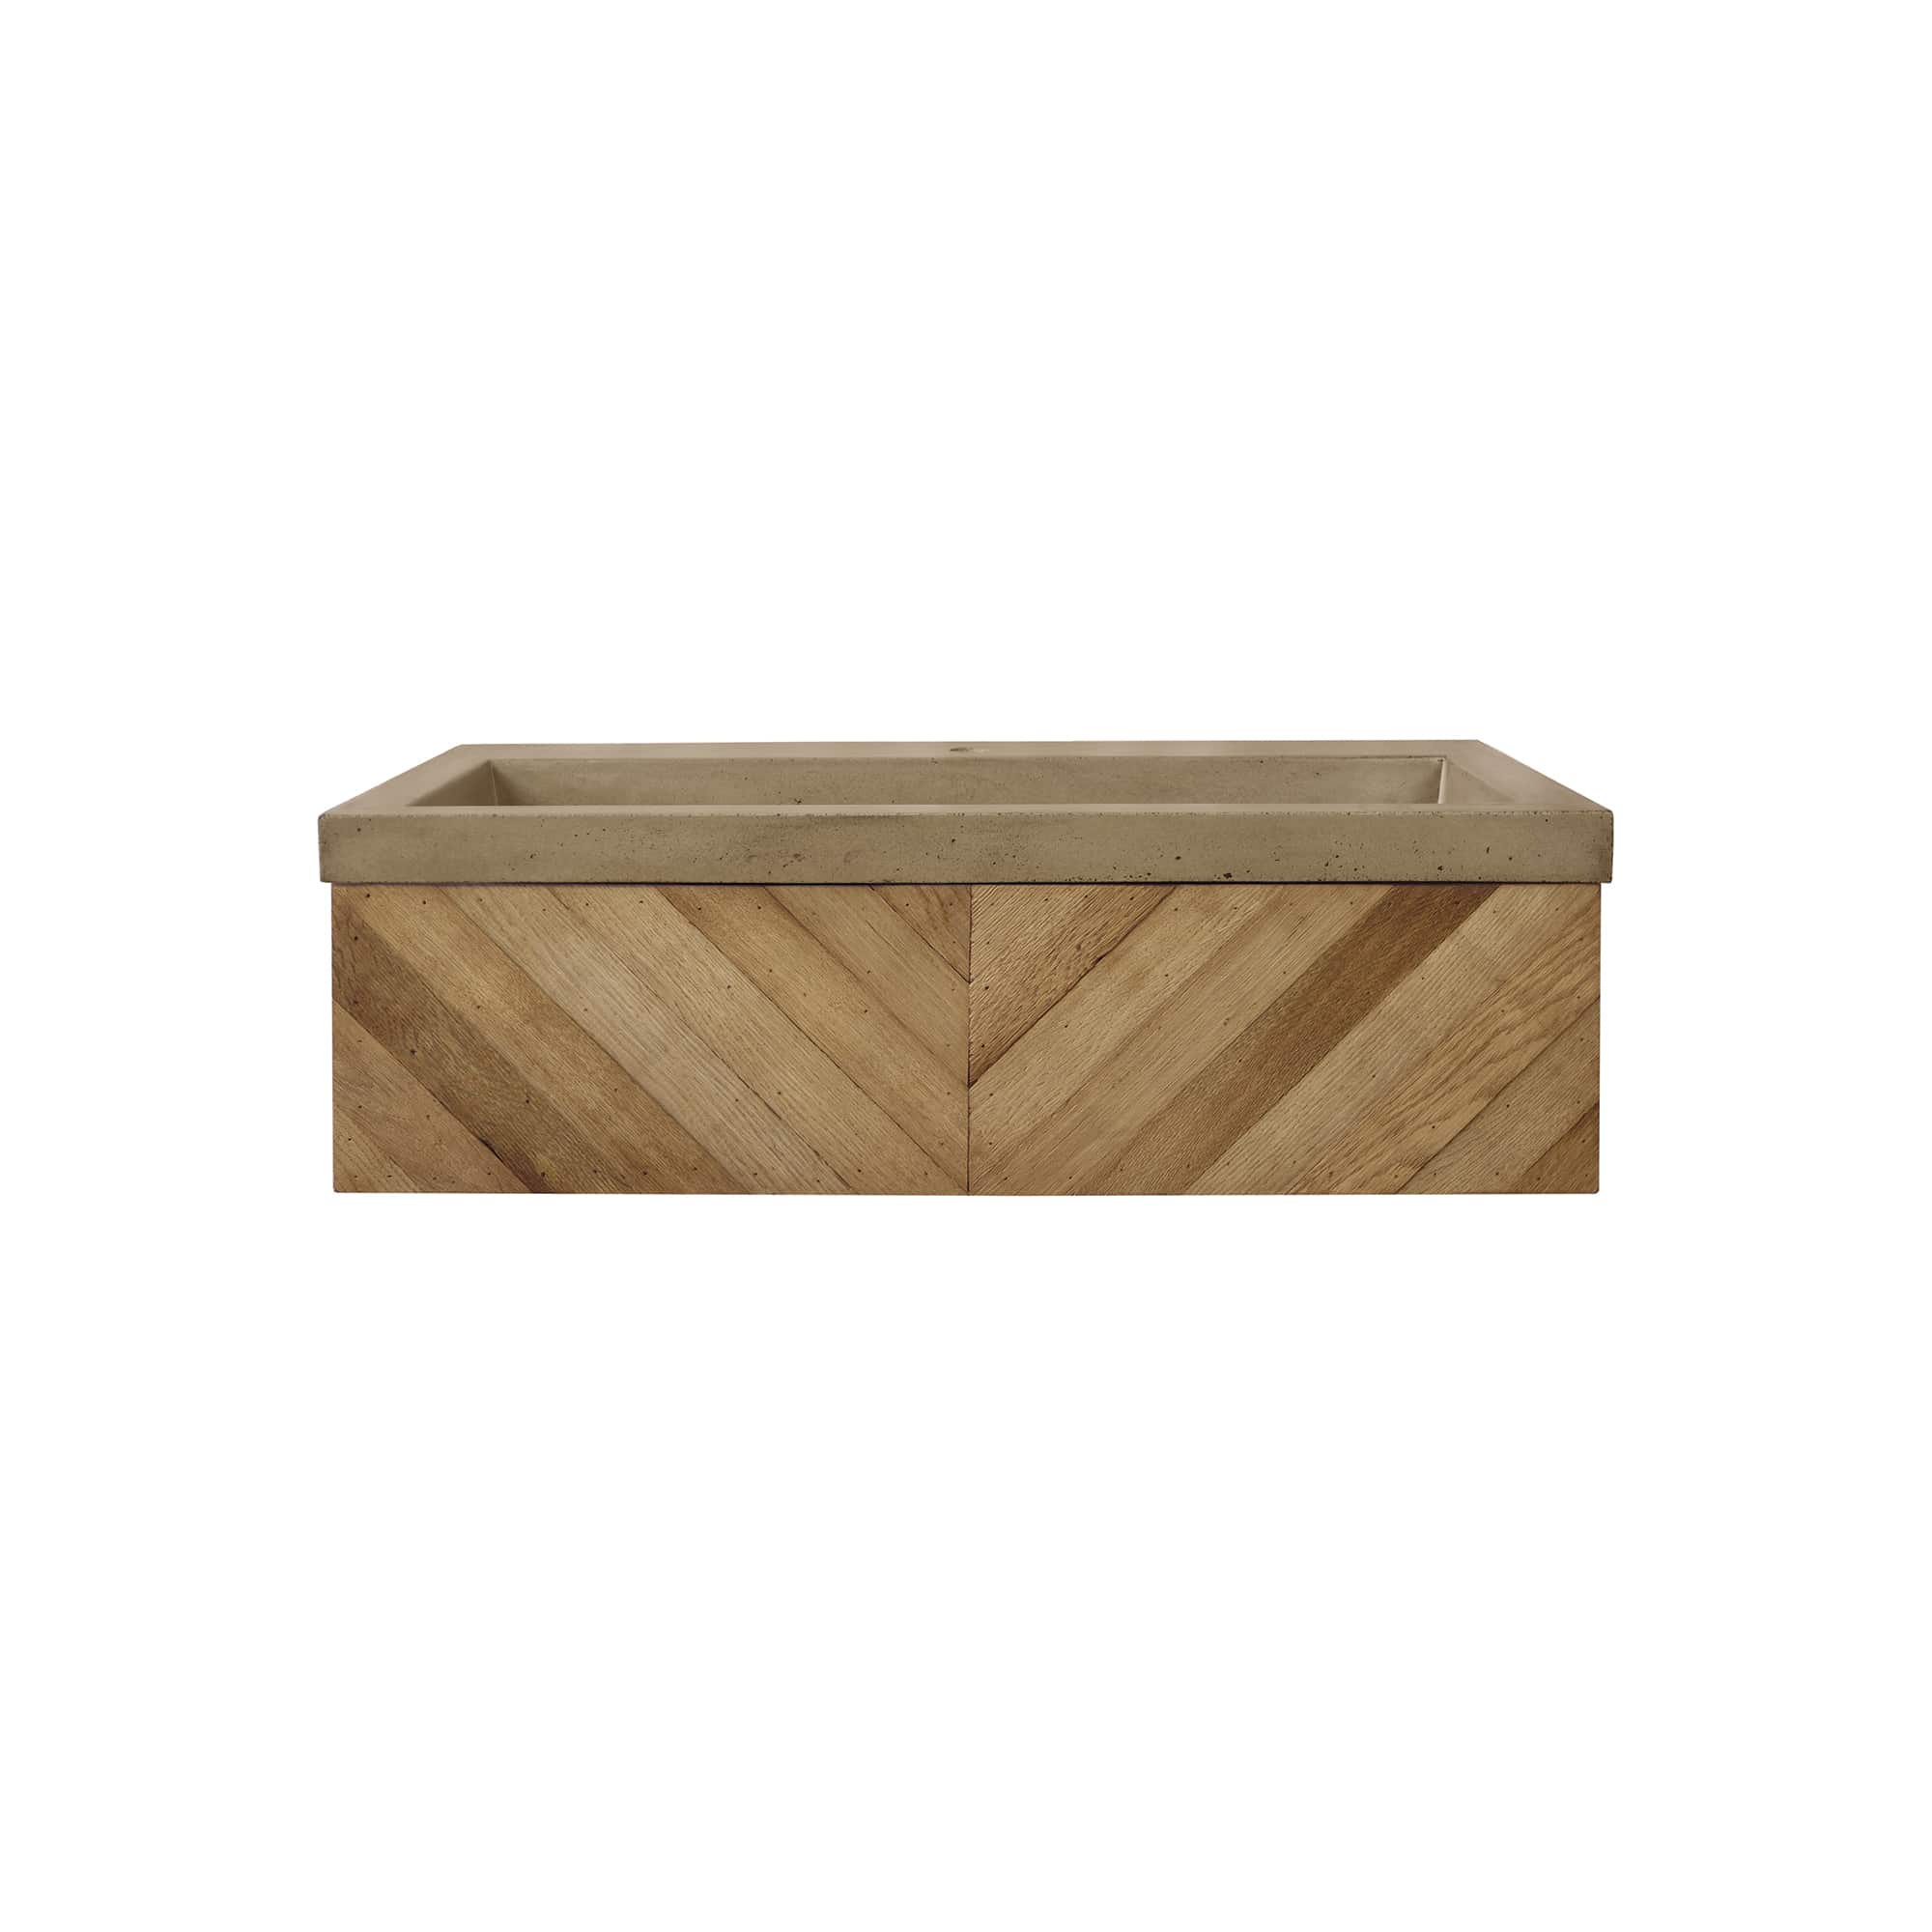 Native Trails 36 inch Chardonnay Floating Vanity with NativeStone Trough Sink in Earth, VNW191-NSL3619-E